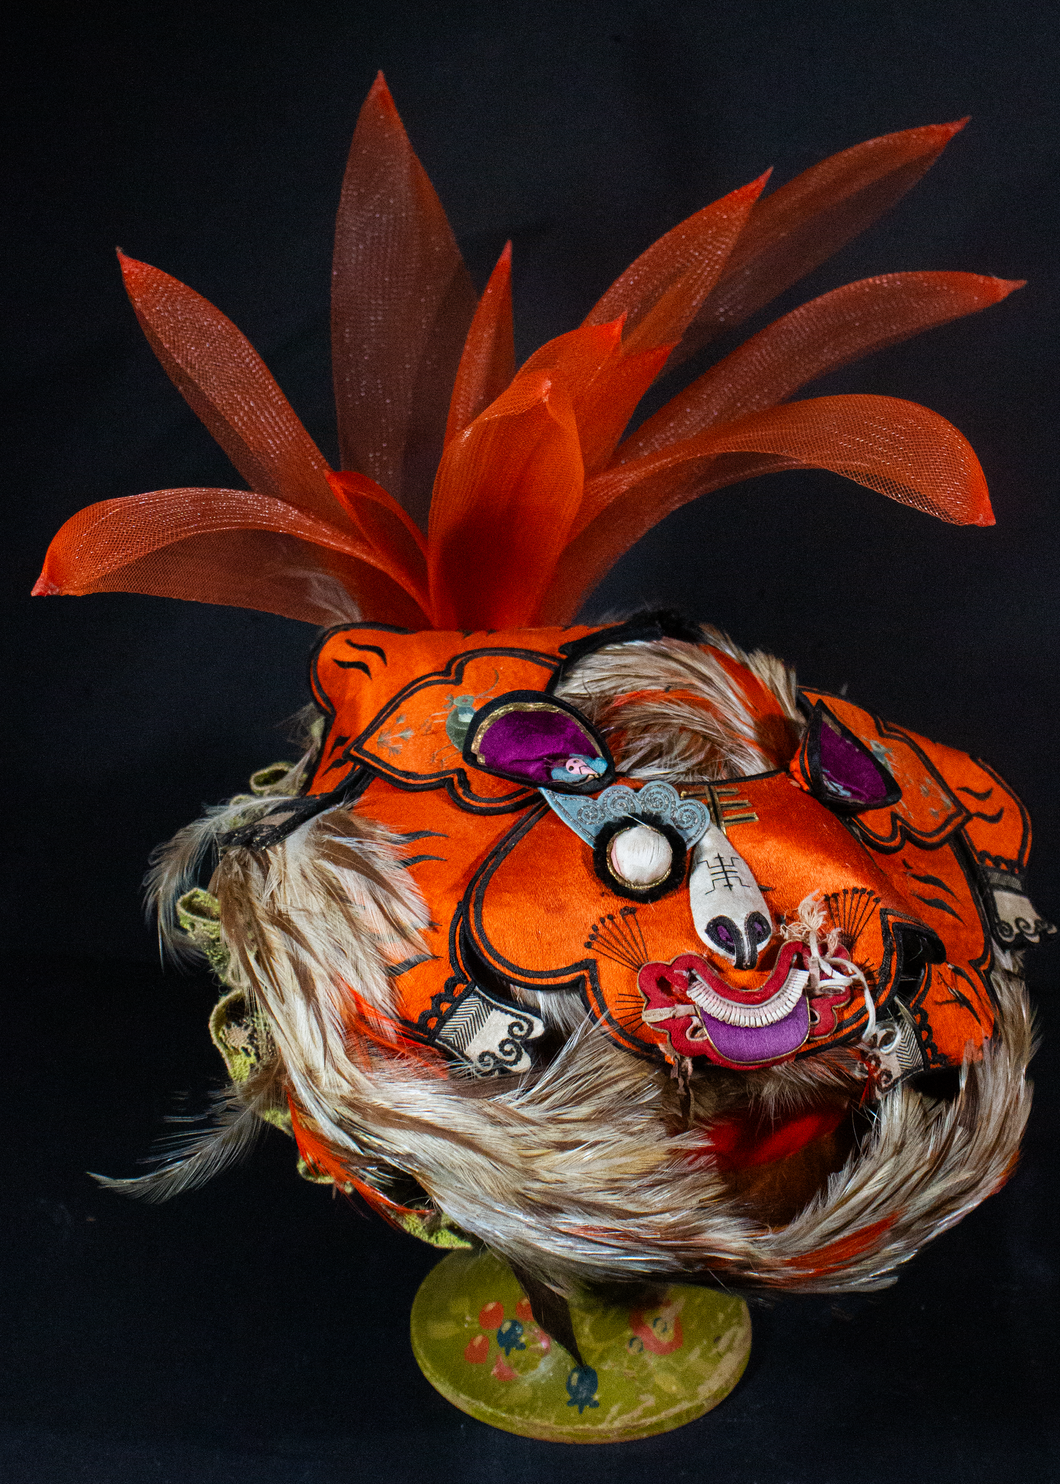 Up-cycled Tiger Hat, created by Atelier Carpe Diem